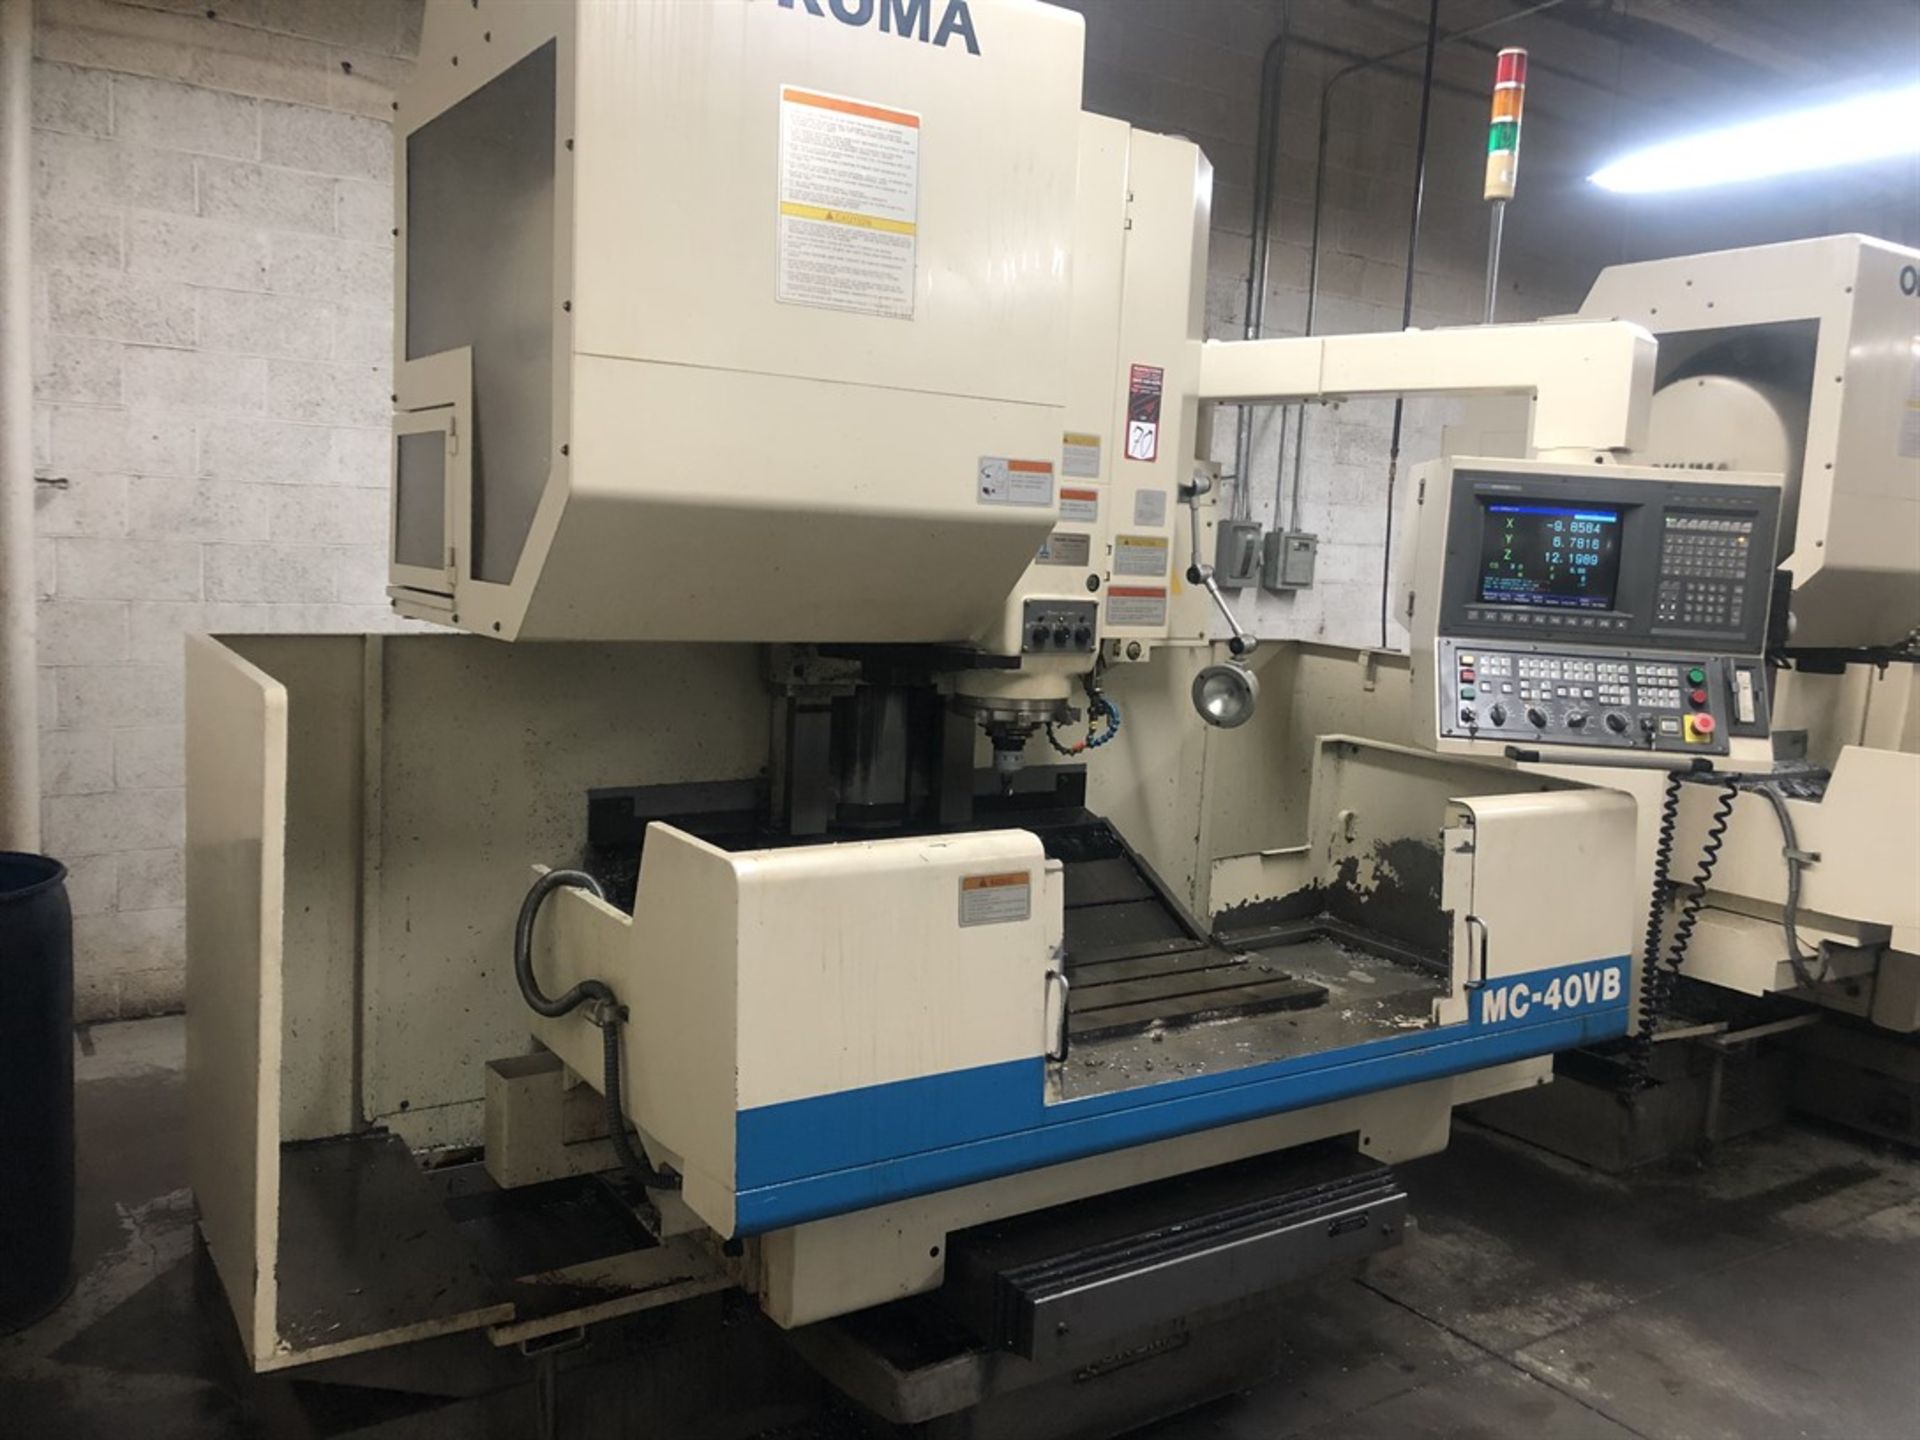 OKUMA MC-40VB Vertical Machining Center, s/n 0770, OSP 7000M Control, 17” x 39” Table, CT50 Spindle, - Image 2 of 10